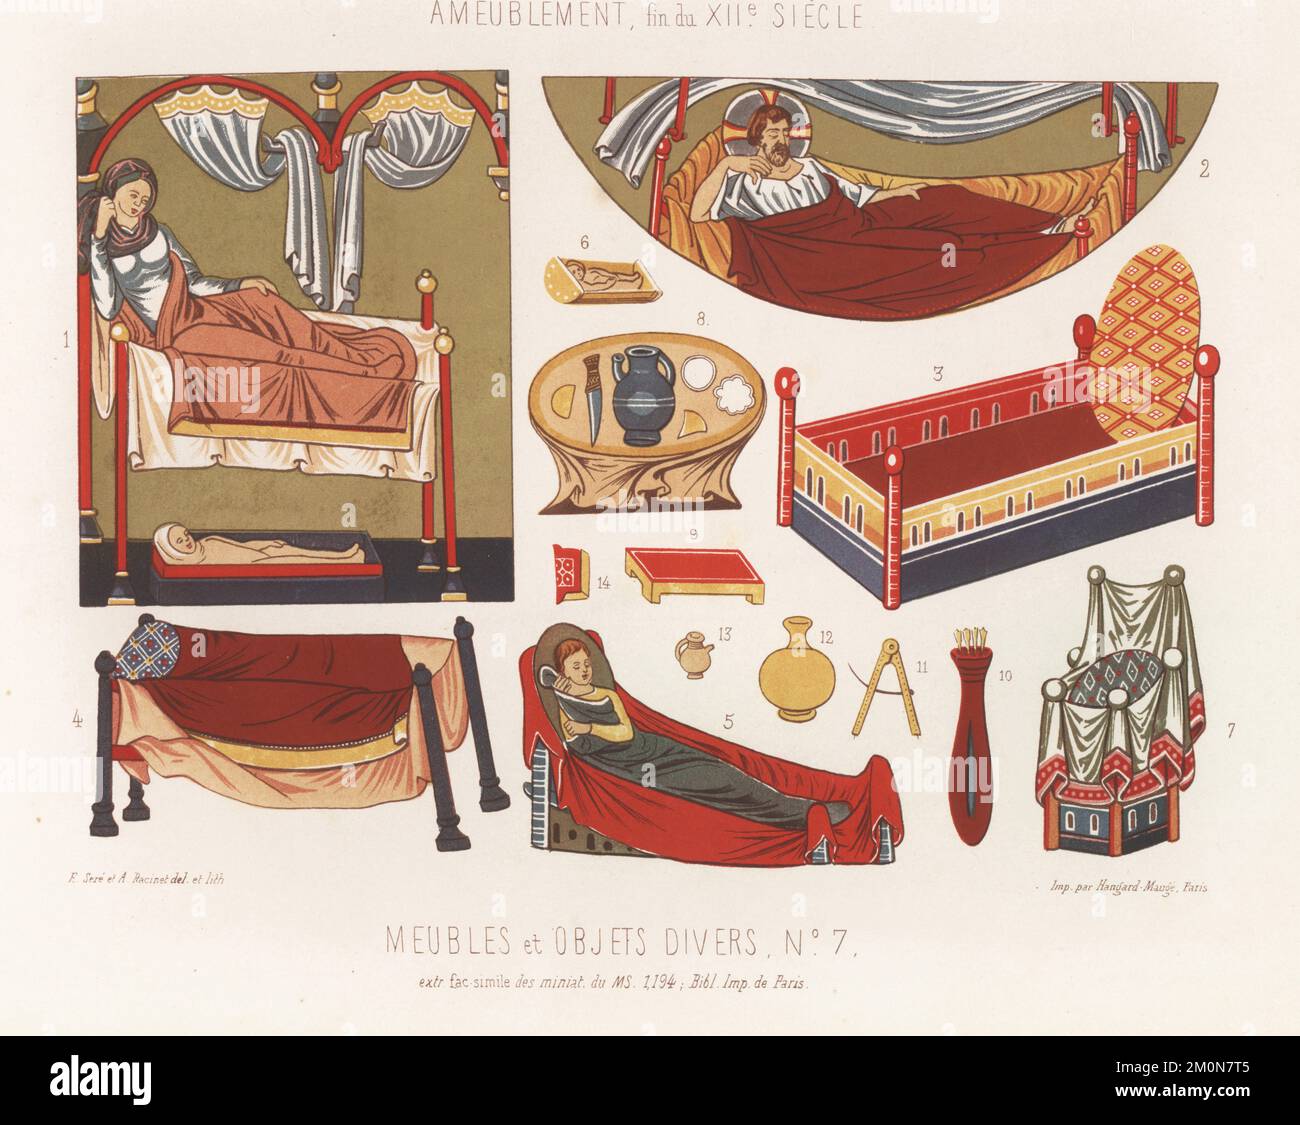 Beds and other furniture, late 12th century. Beds and cots with curtains 1-5, bed with moveable disk 3, desk 6, ceremonial chair 7, table 8, stool 9, quiver 10, stonemason's compass 11, vases 12,13, and  fragment of book binding 14. Meubles et objets divers 7, fin du XIIe siecle. Taken from a manuscript Psalterium Cantuariense, Latin 8846, Psautier MS 1194, Bibliotheque Imperiale de Paris. France XIIe Siecle. Chromolithograph drawn and lithographed by Ferdinand Sere and Auguste Racinet from Charles Louandre’s Les Arts Somptuaires, The Sumptuary Arts, Hangard-Mauge, Paris, 1858. Stock Photo